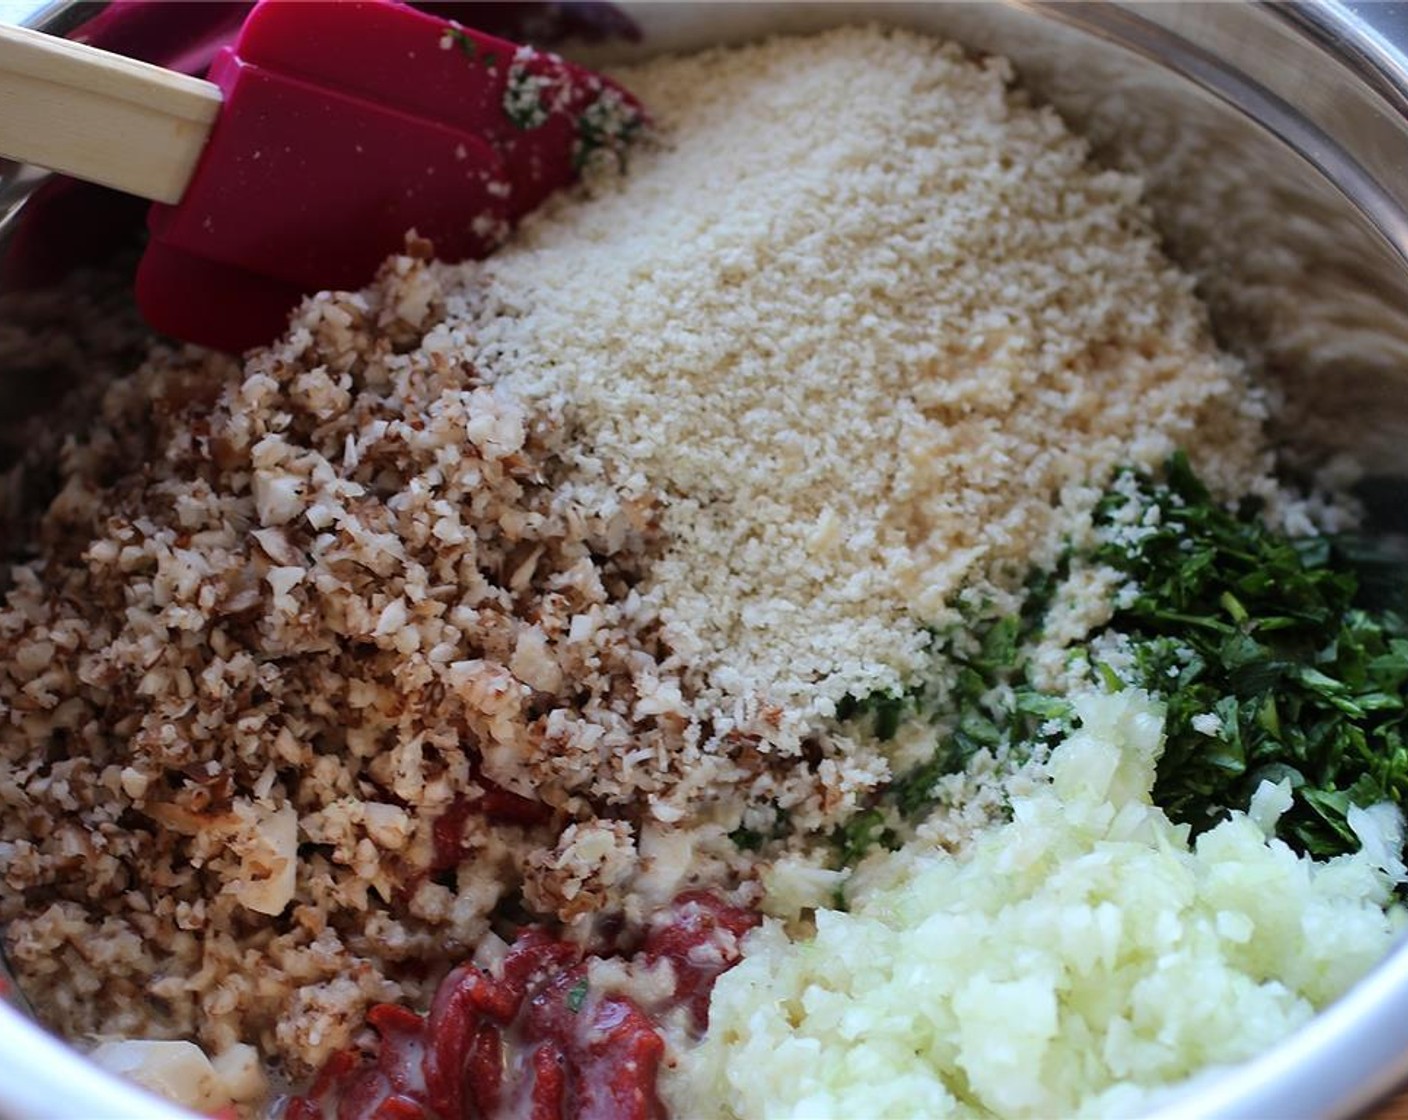 step 3 Add the onion, mushrooms, parsley, spinach, walnuts, Garlic (2 cloves), Nutritional Yeast (3/4 cup), Panko Breadcrumbs (1 cup), Lentils (2 1/2 cups), egg replacers, 2 tablespoons of Tomato Paste (1/4 cup) and Kosher Salt (1 pinch) into a large bowl.